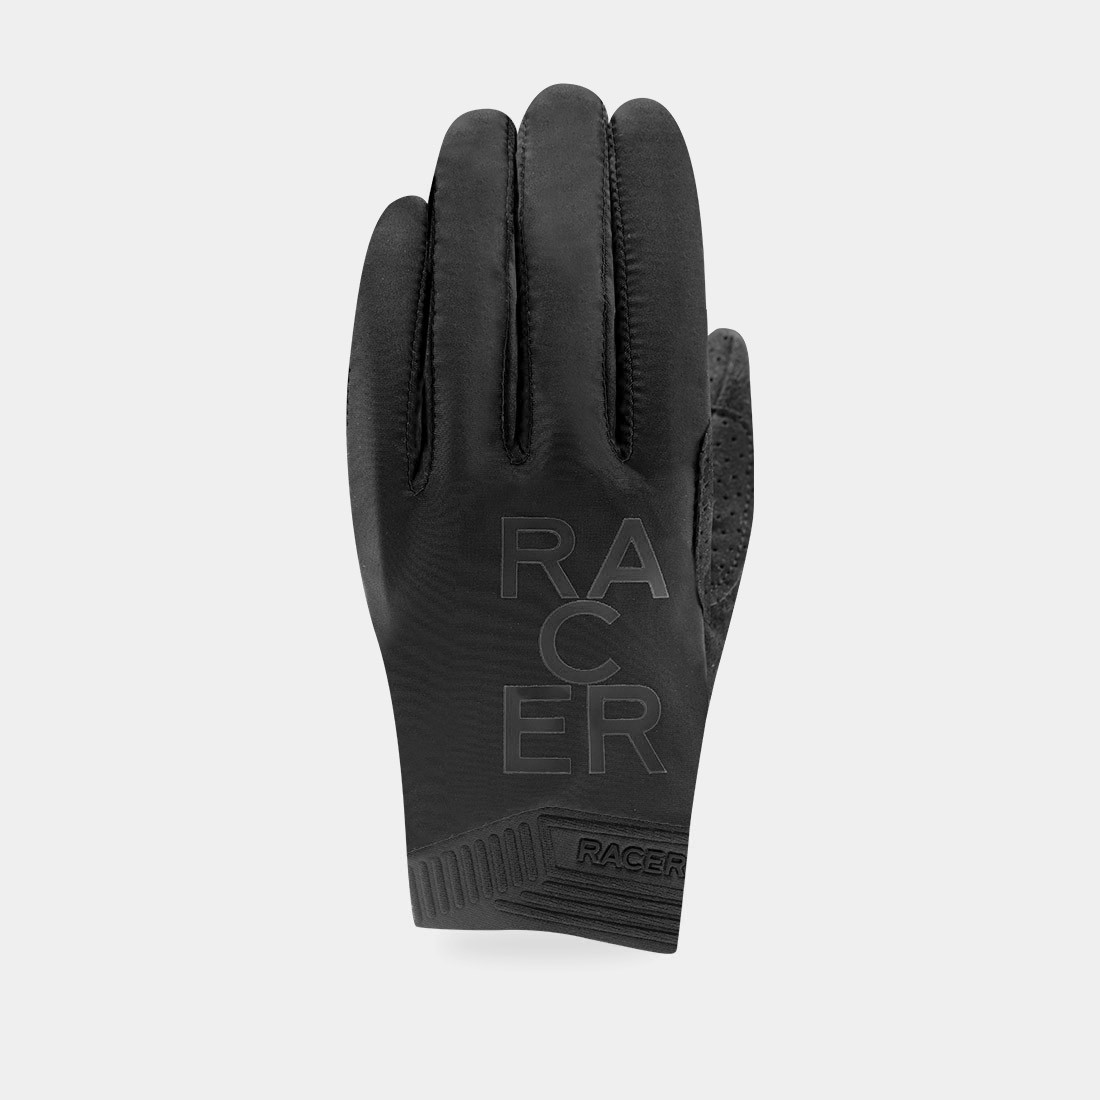 GP STYLE 2 - SUMMER CYCLING GLOVES - RACER